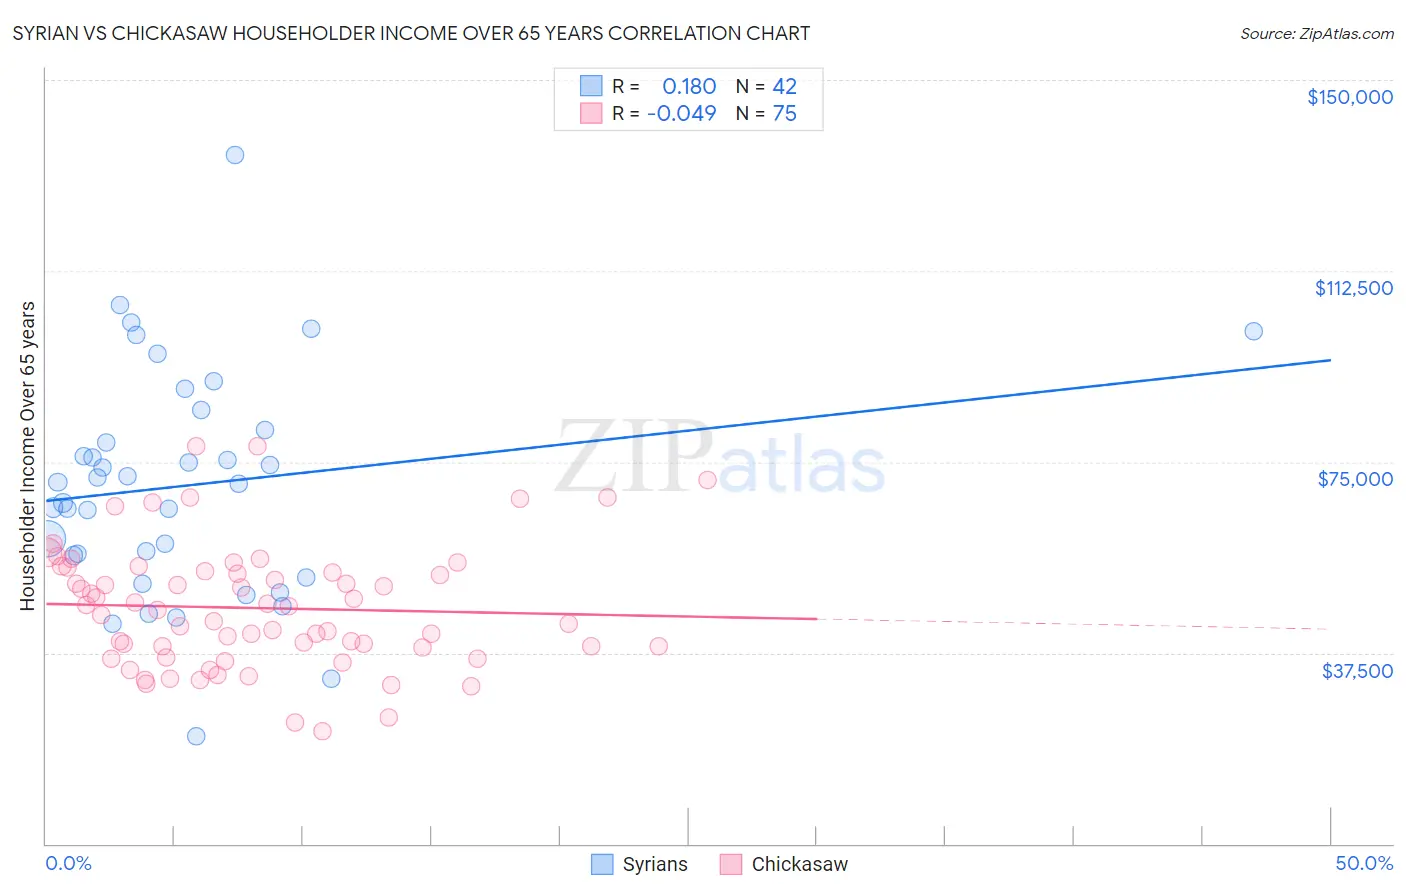 Syrian vs Chickasaw Householder Income Over 65 years